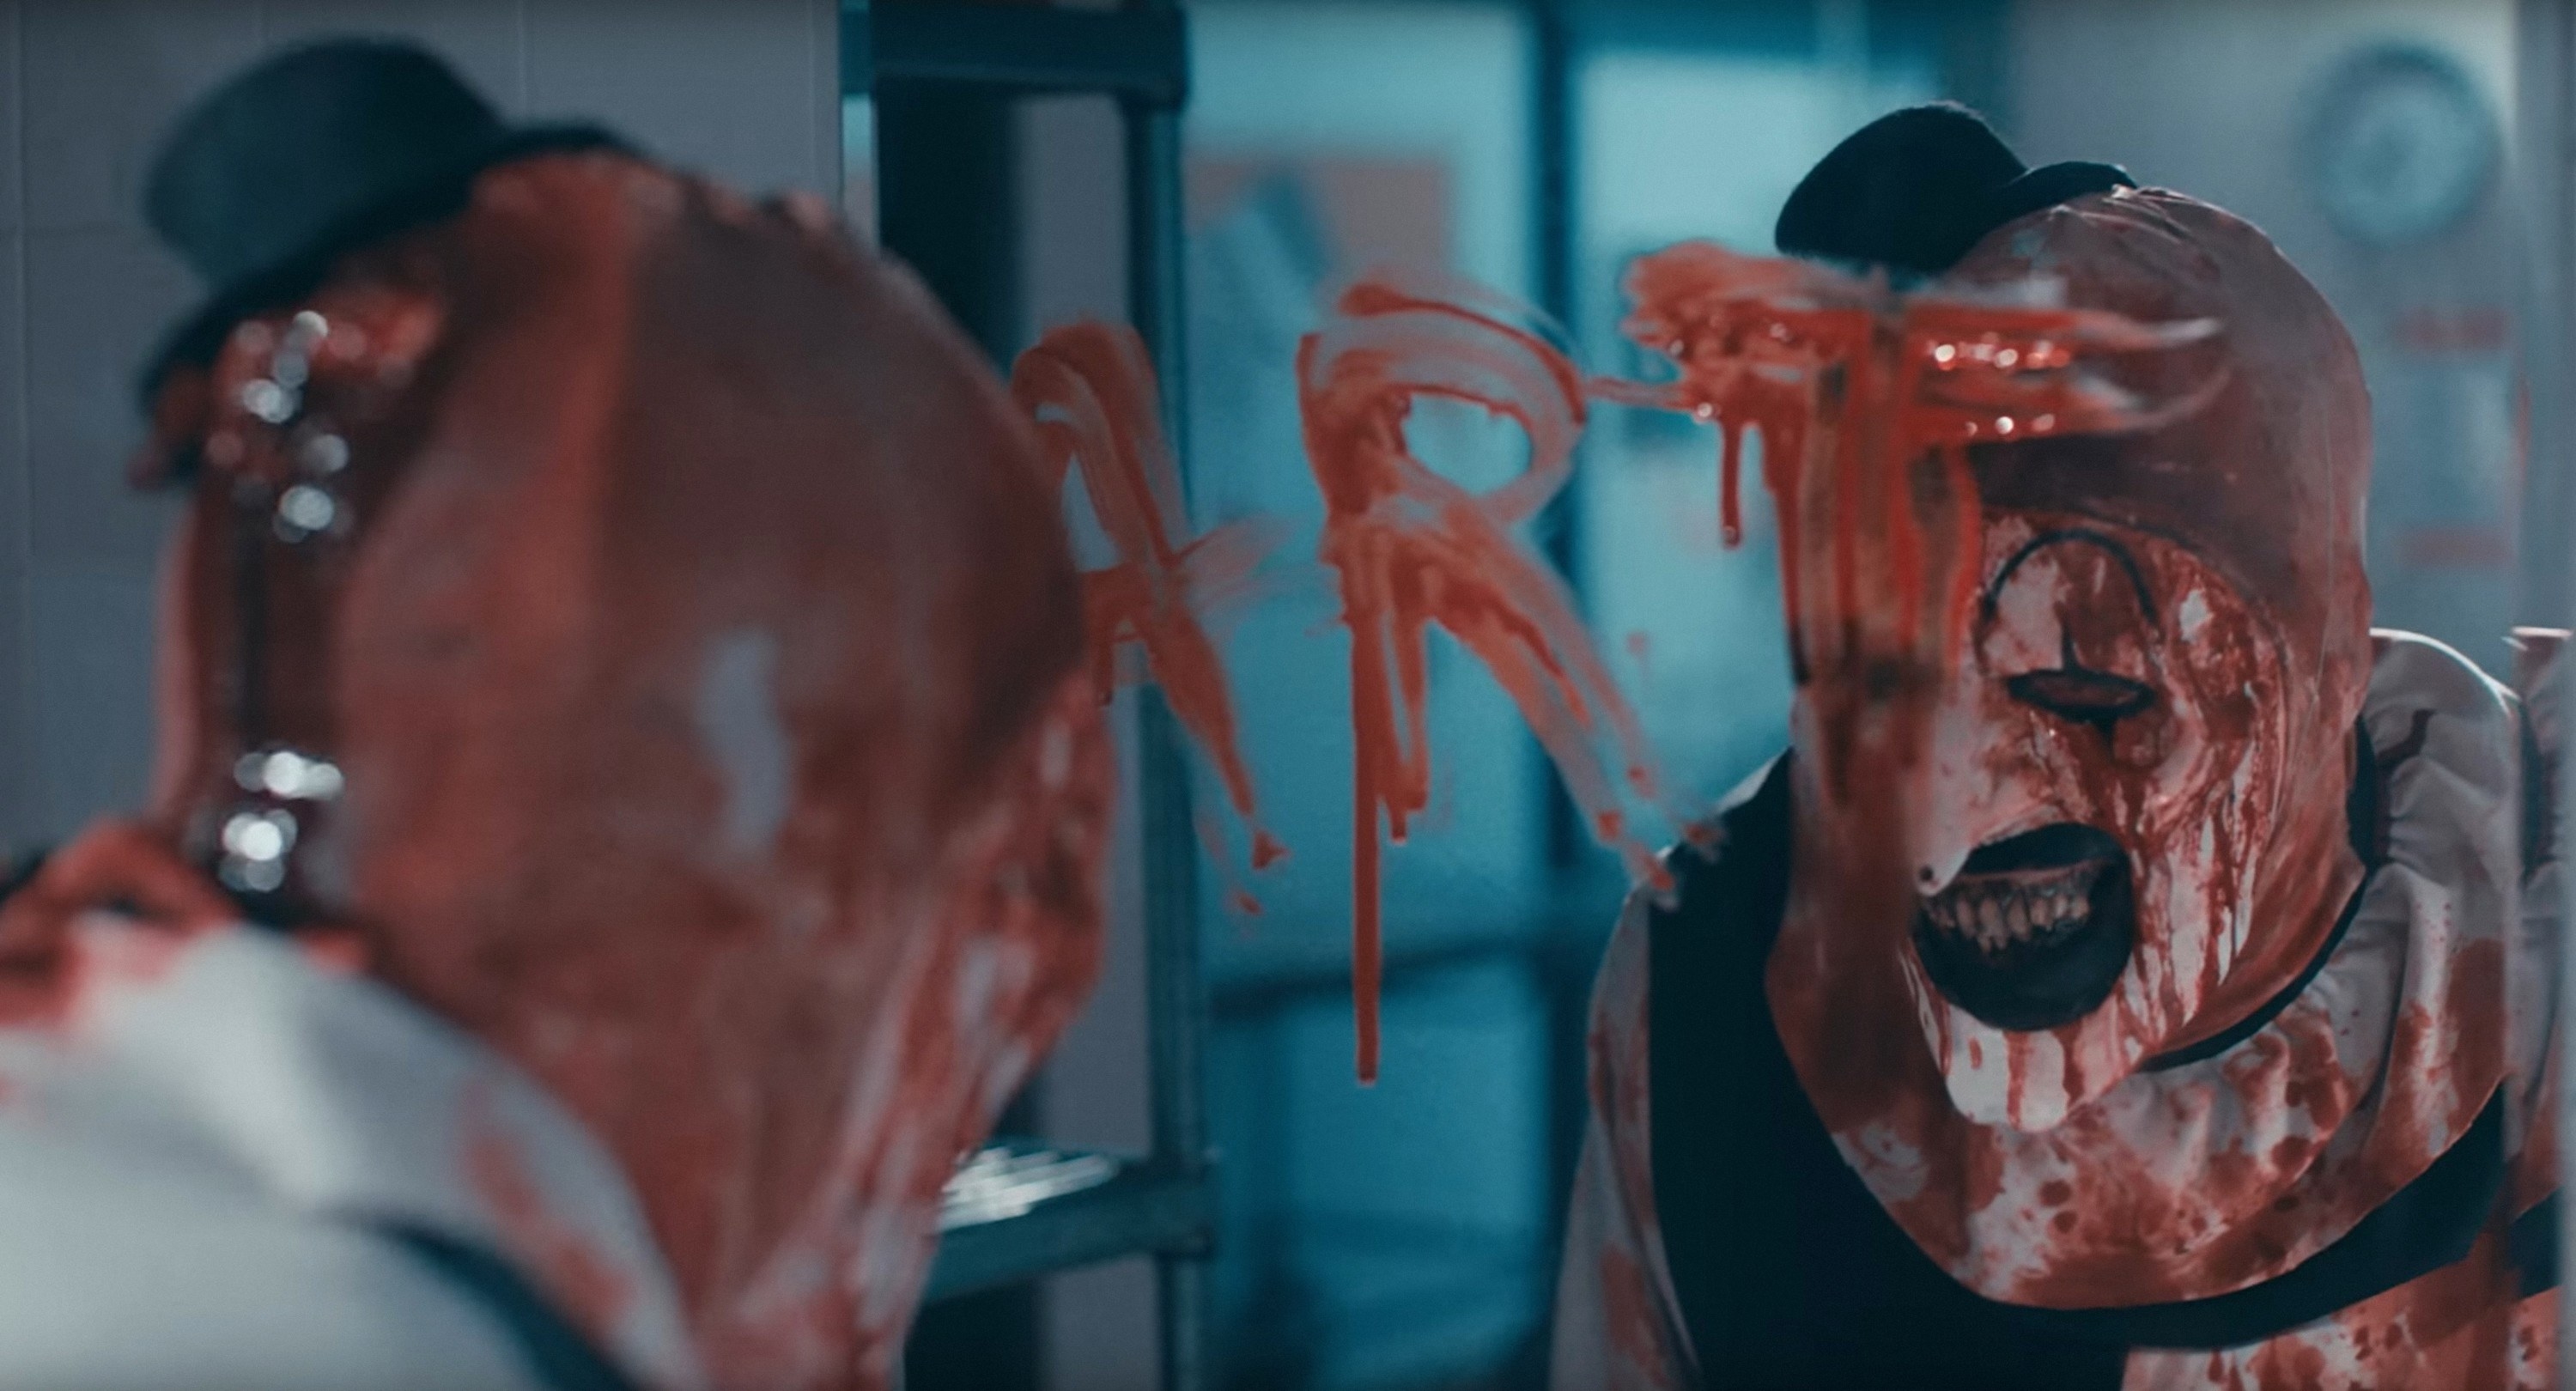 A bloodied clown standing in front of a mirror with &quot;Art&quot; written across it (in blood)